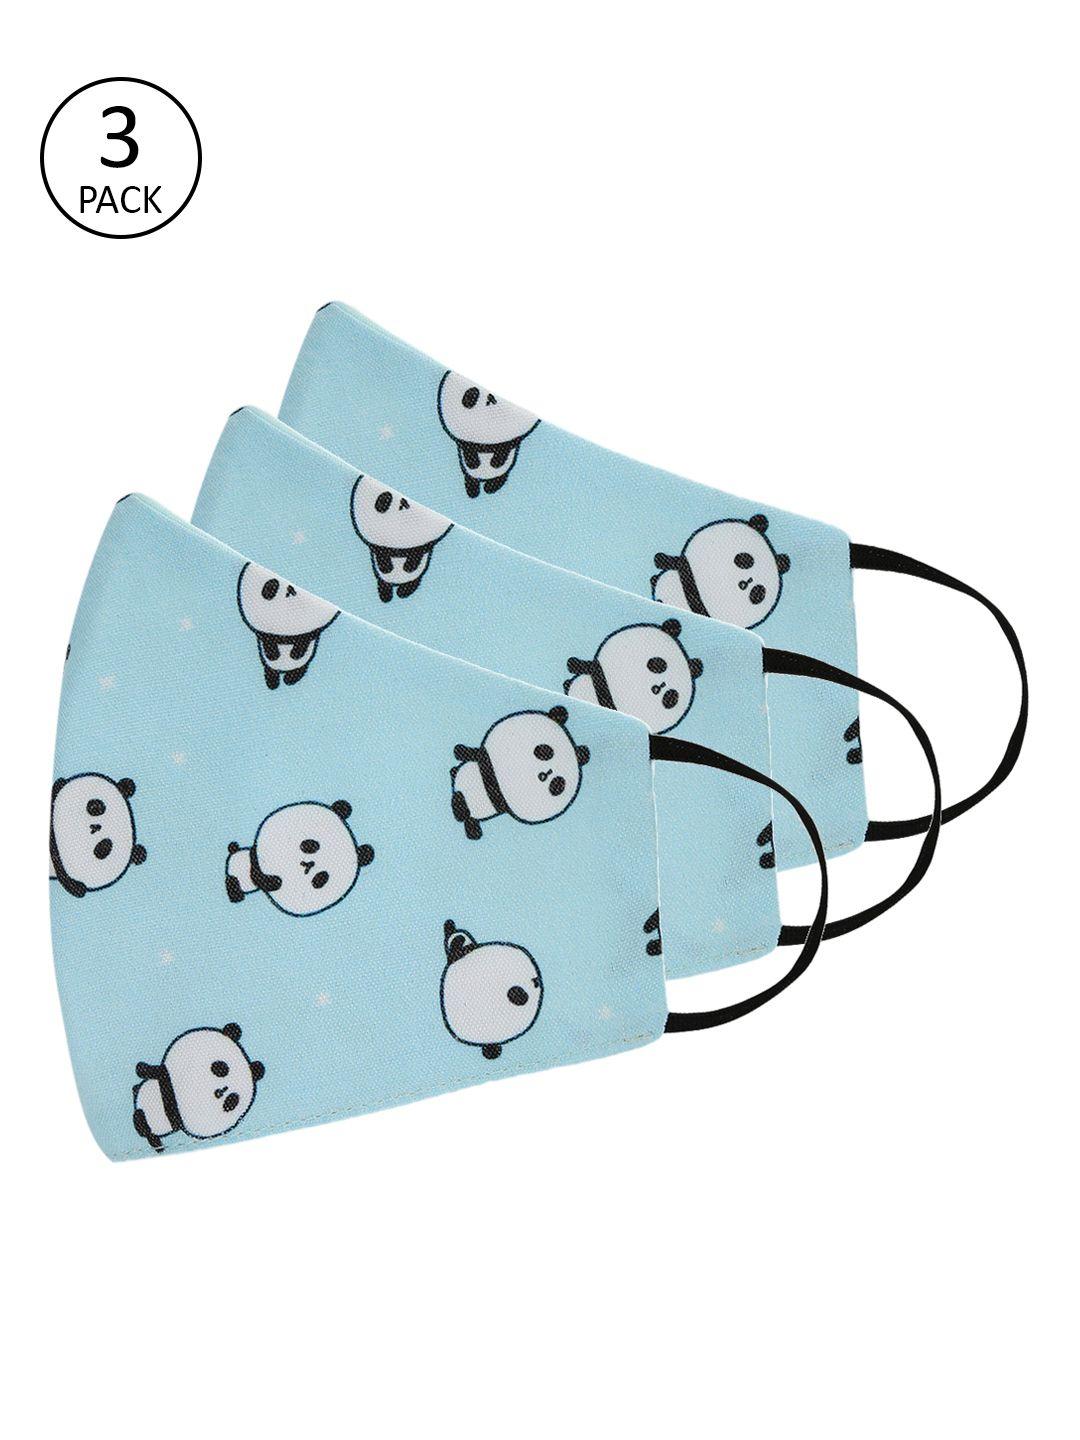 tossido unisex pack of 3 blue 3 ply premium cotton printed masks